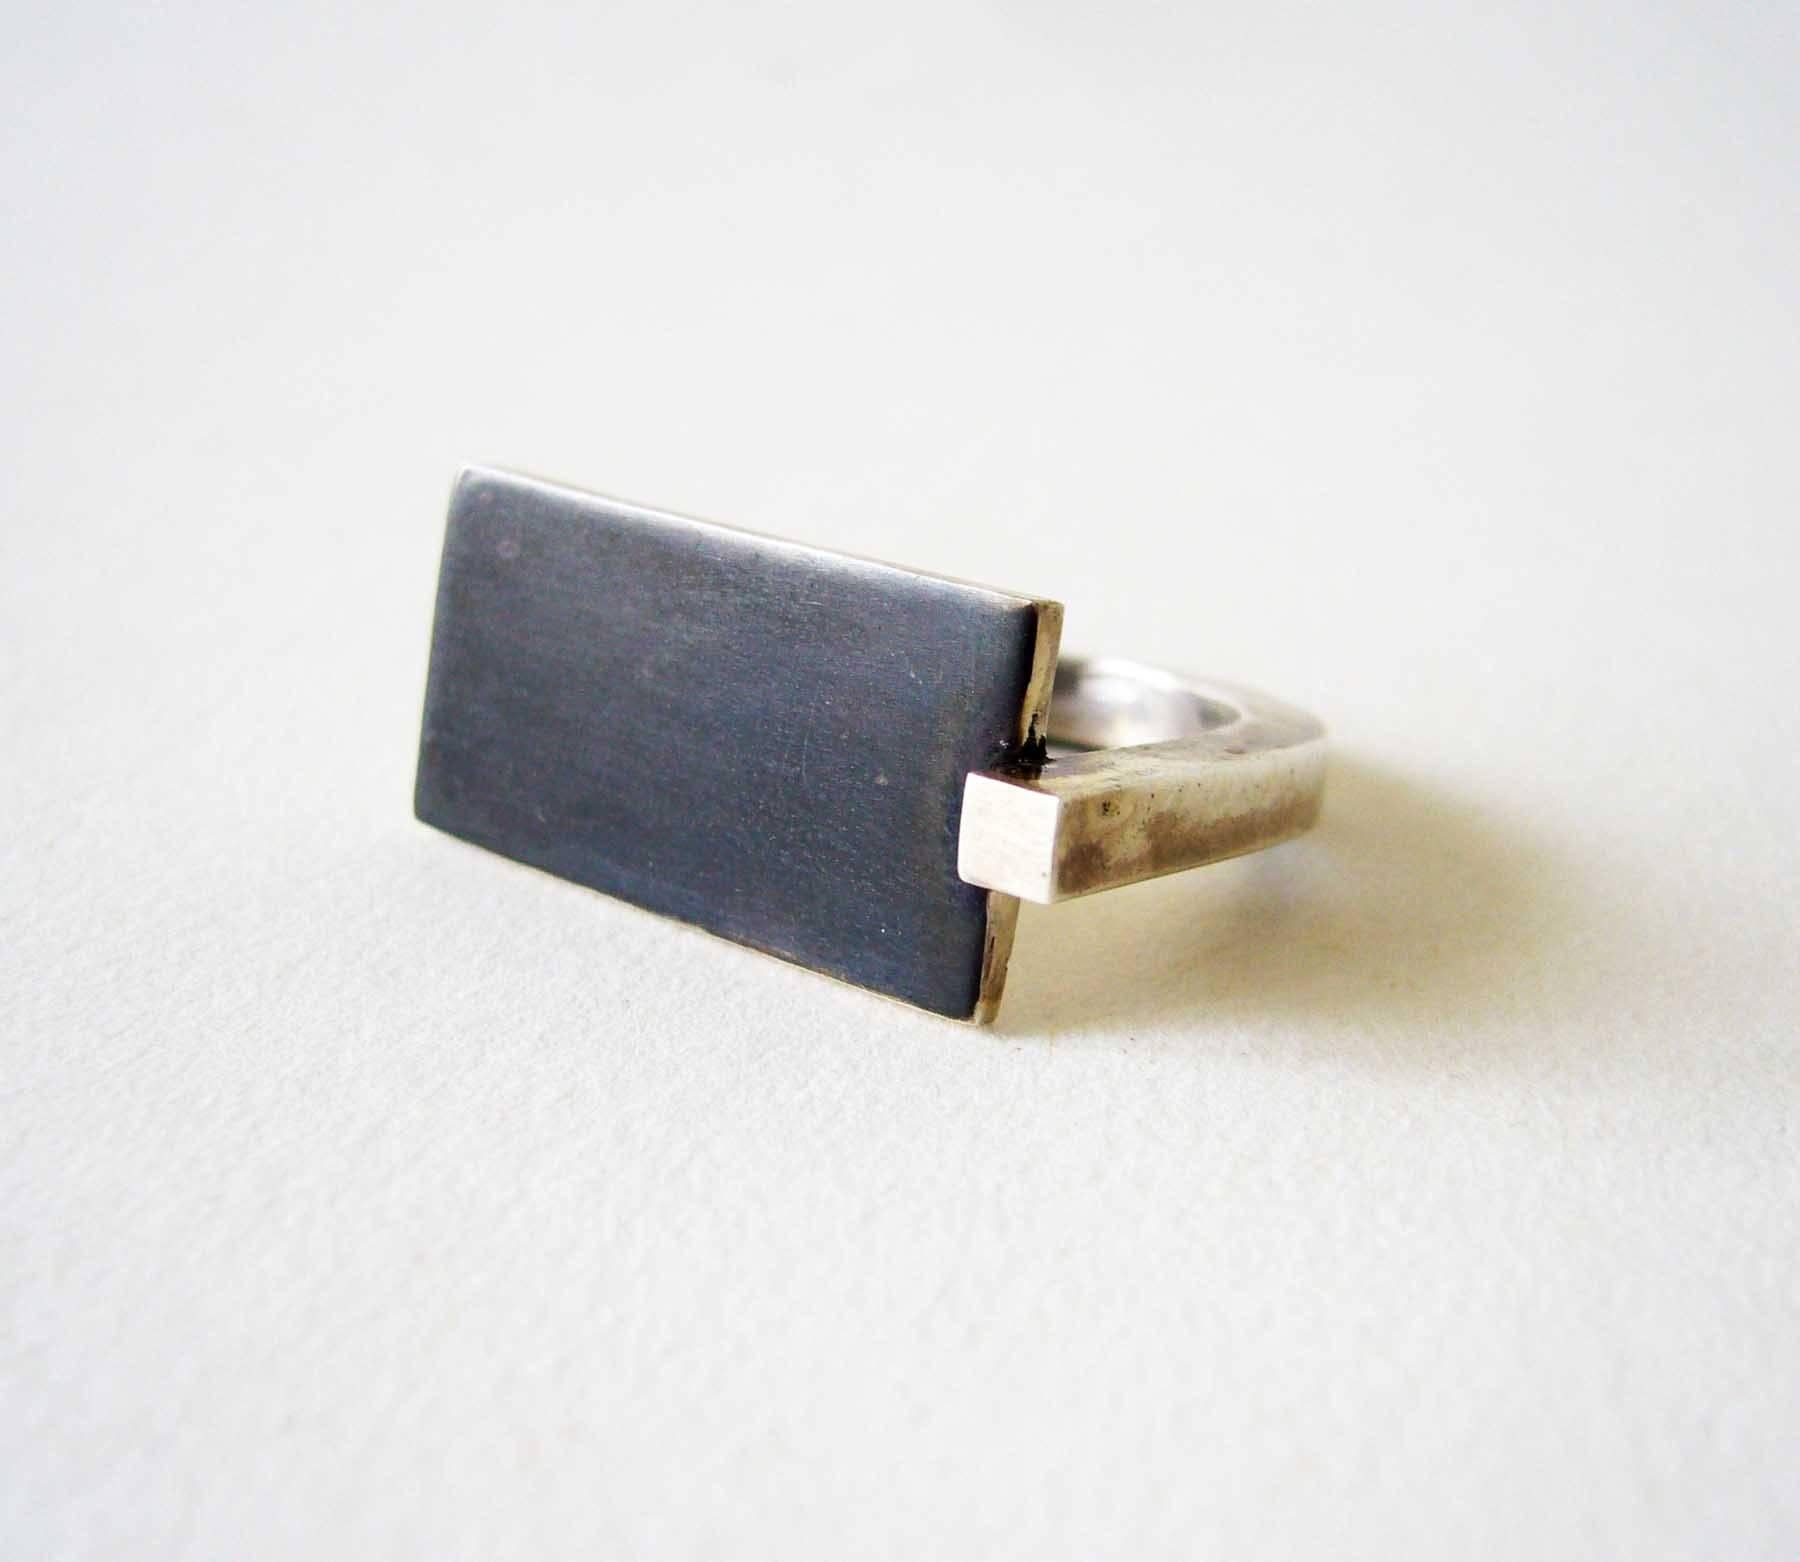 Oxidized sterling silver minimalist ring created by Heidi Abrahamson of Phoenix, Arizona.  Ring features a square sterling silver 